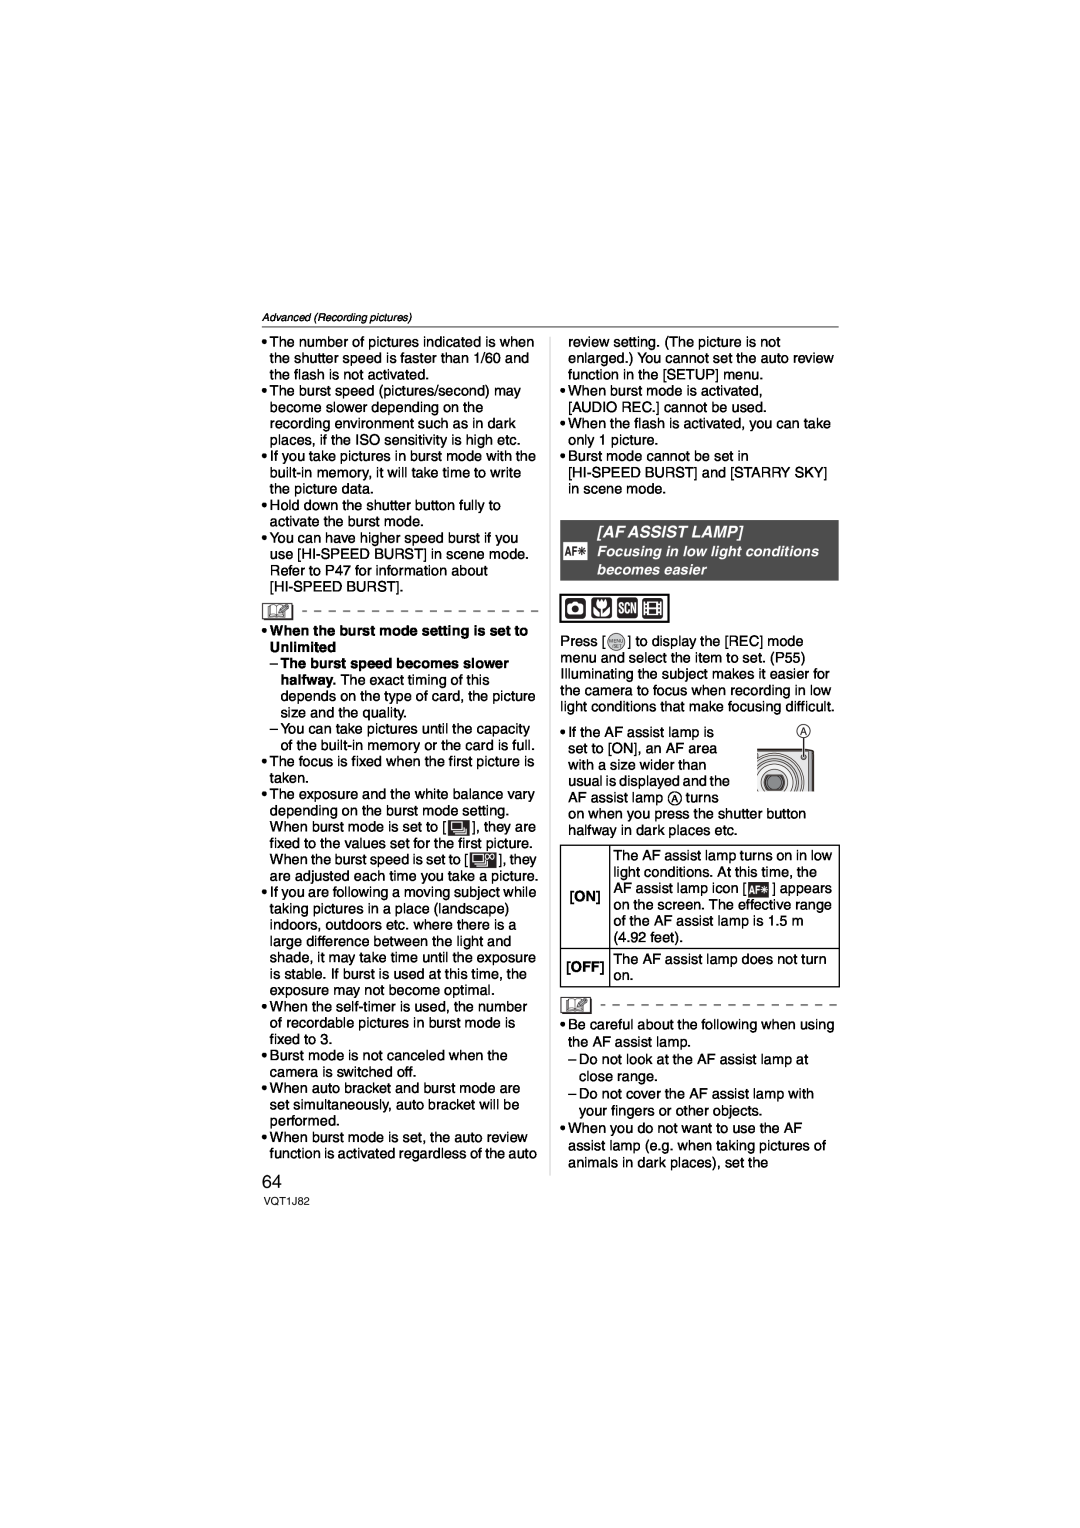 Panasonic DMC-FX33 operating instructions Af Assist Lamp, When the burst mode setting is set to Unlimited 